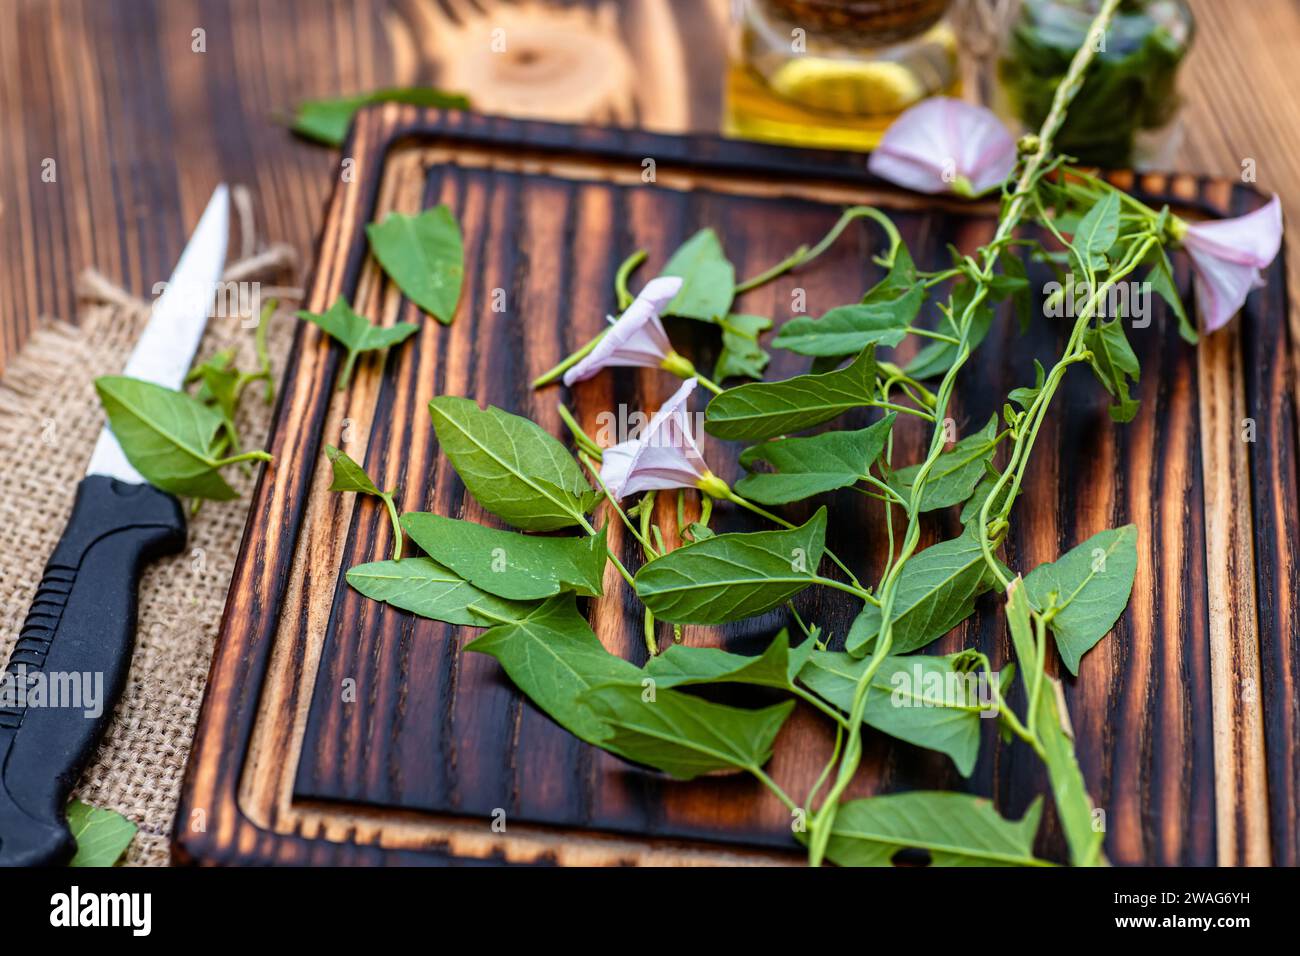 Fresh flowers Convolvulus arvensis, or field bindweed on a cutting board in summer during the harvesting period of medicinal herbs. Stock Photo